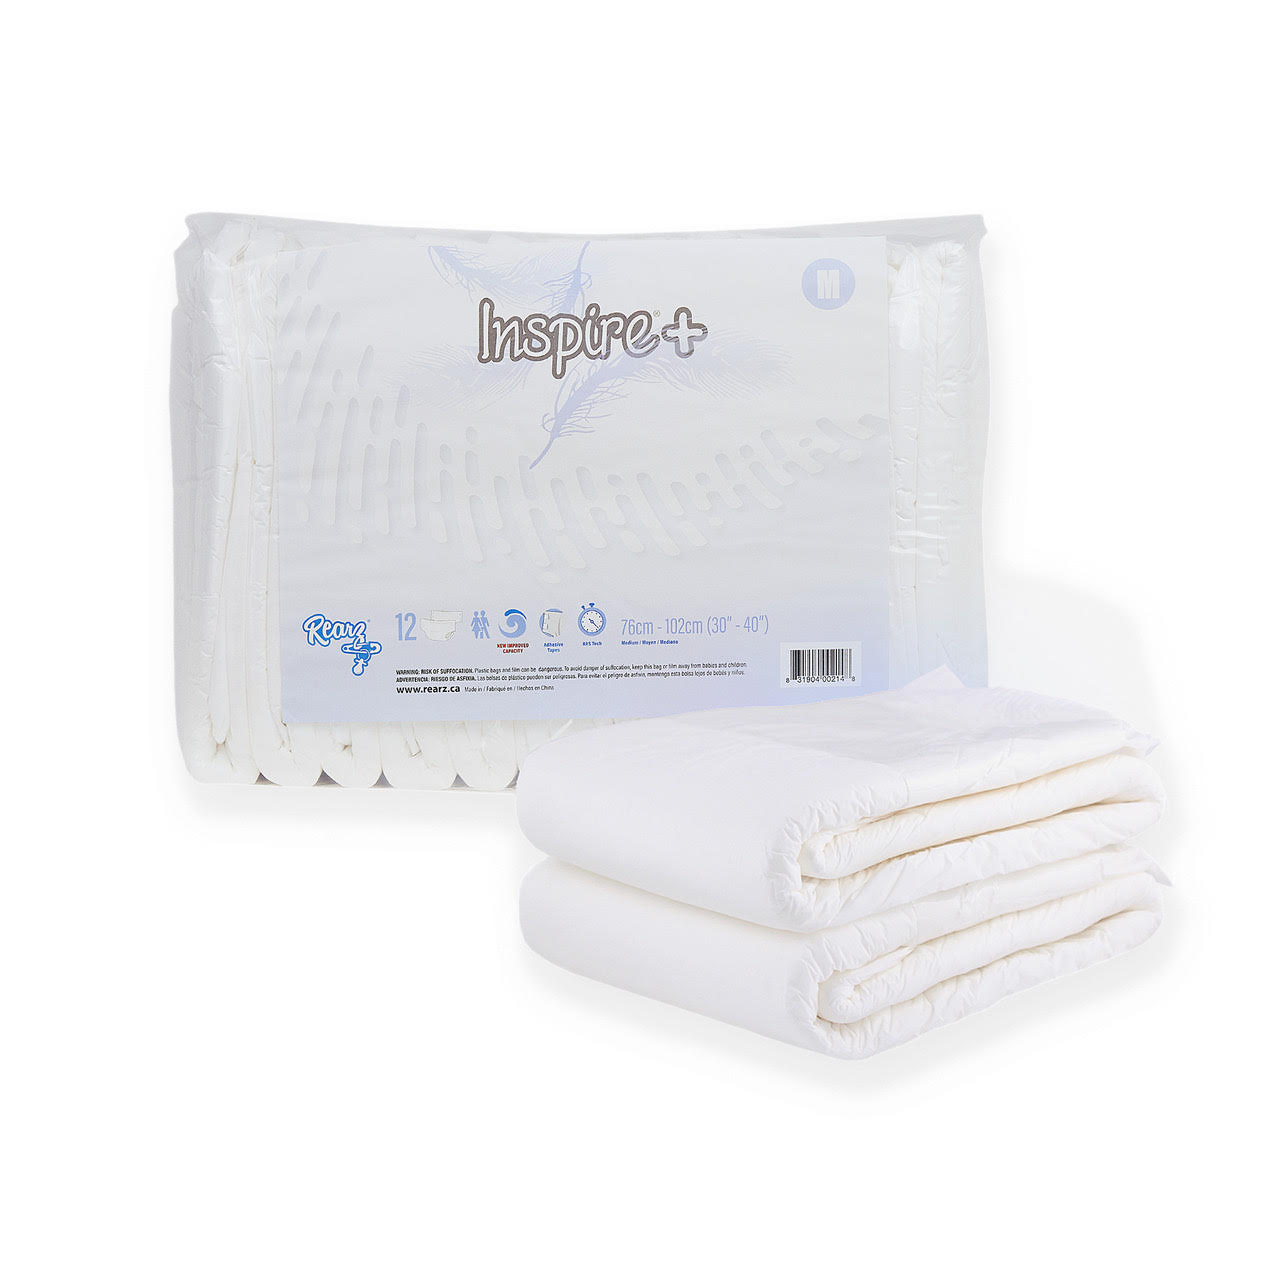 Marquee Plus Adult Pull-Up Diapers-Size 44 To 58 Inches Adult